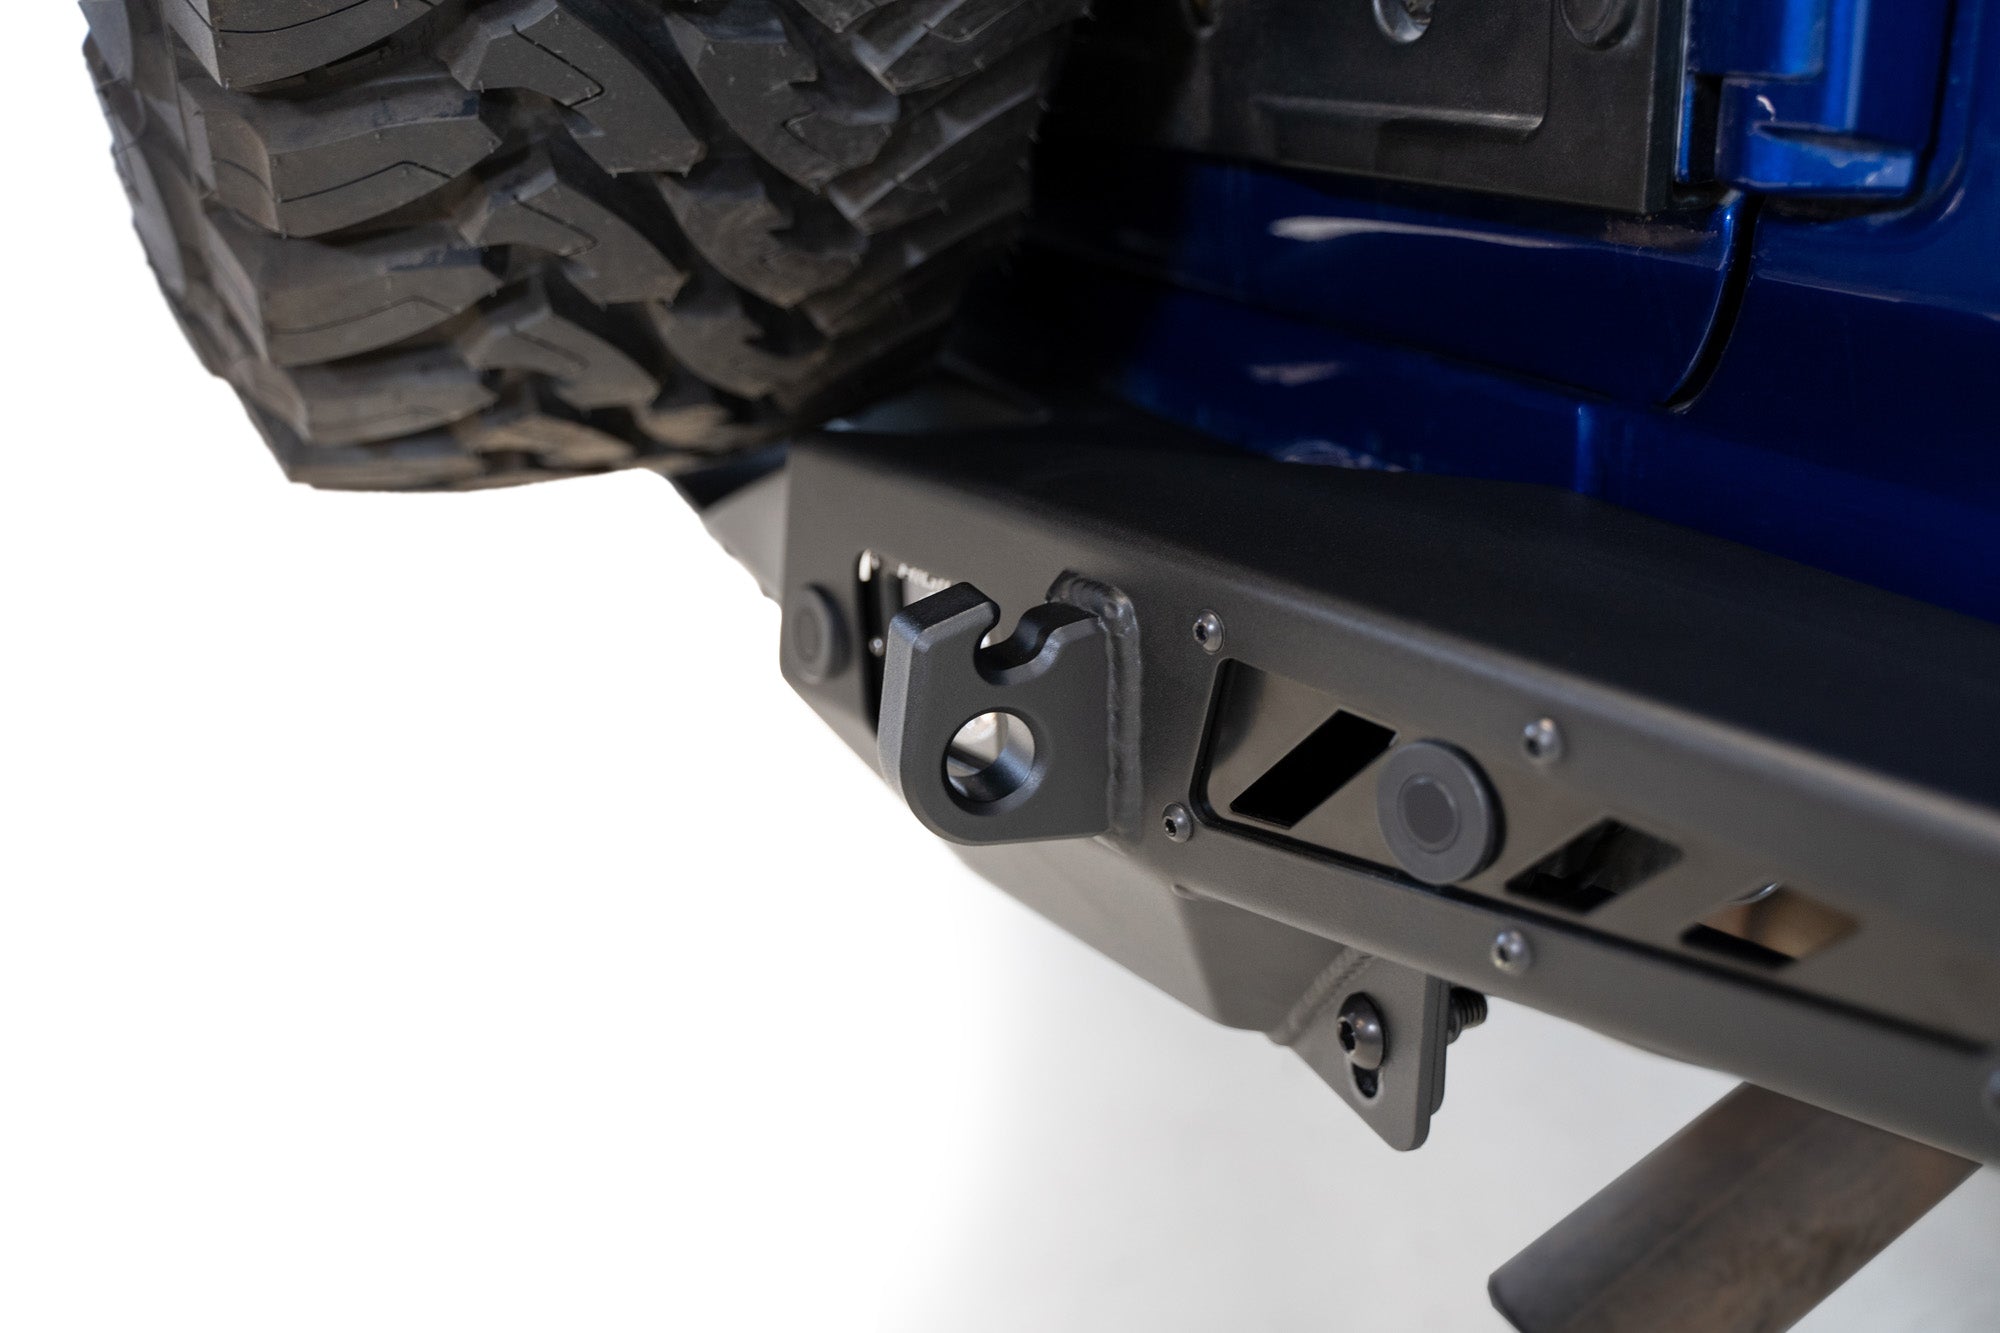 Clevis mount on the Stealth Fighter Rear Bumper for the Jeep Wrangler JL